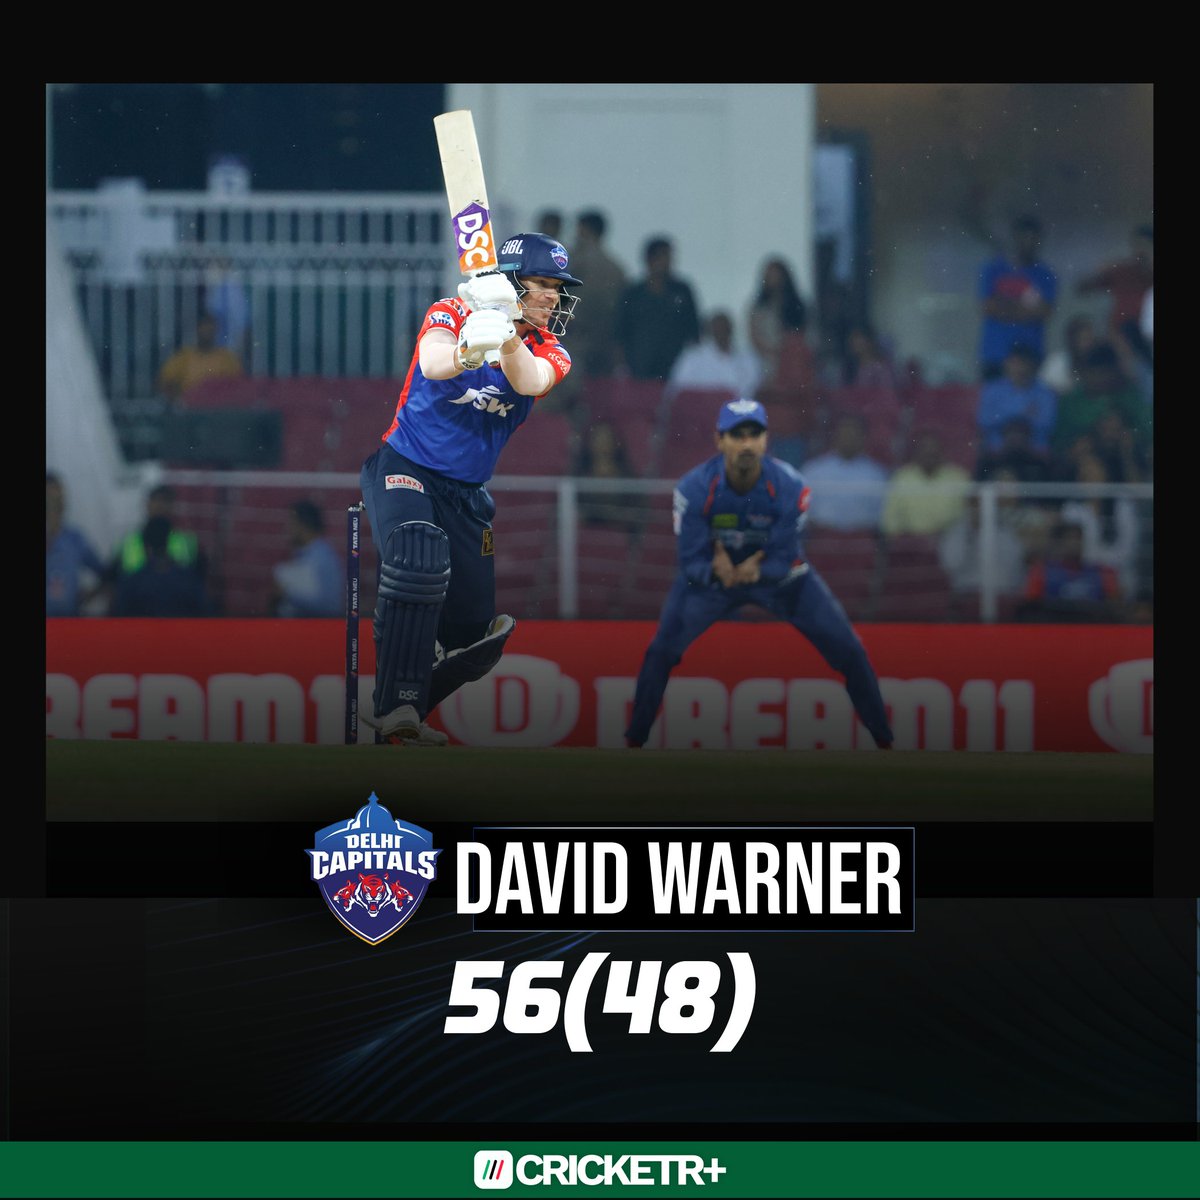 Warner was excellent with his bat today 👏

#DCvLSG #CricketR #TATAIPL 
@davidwarner31